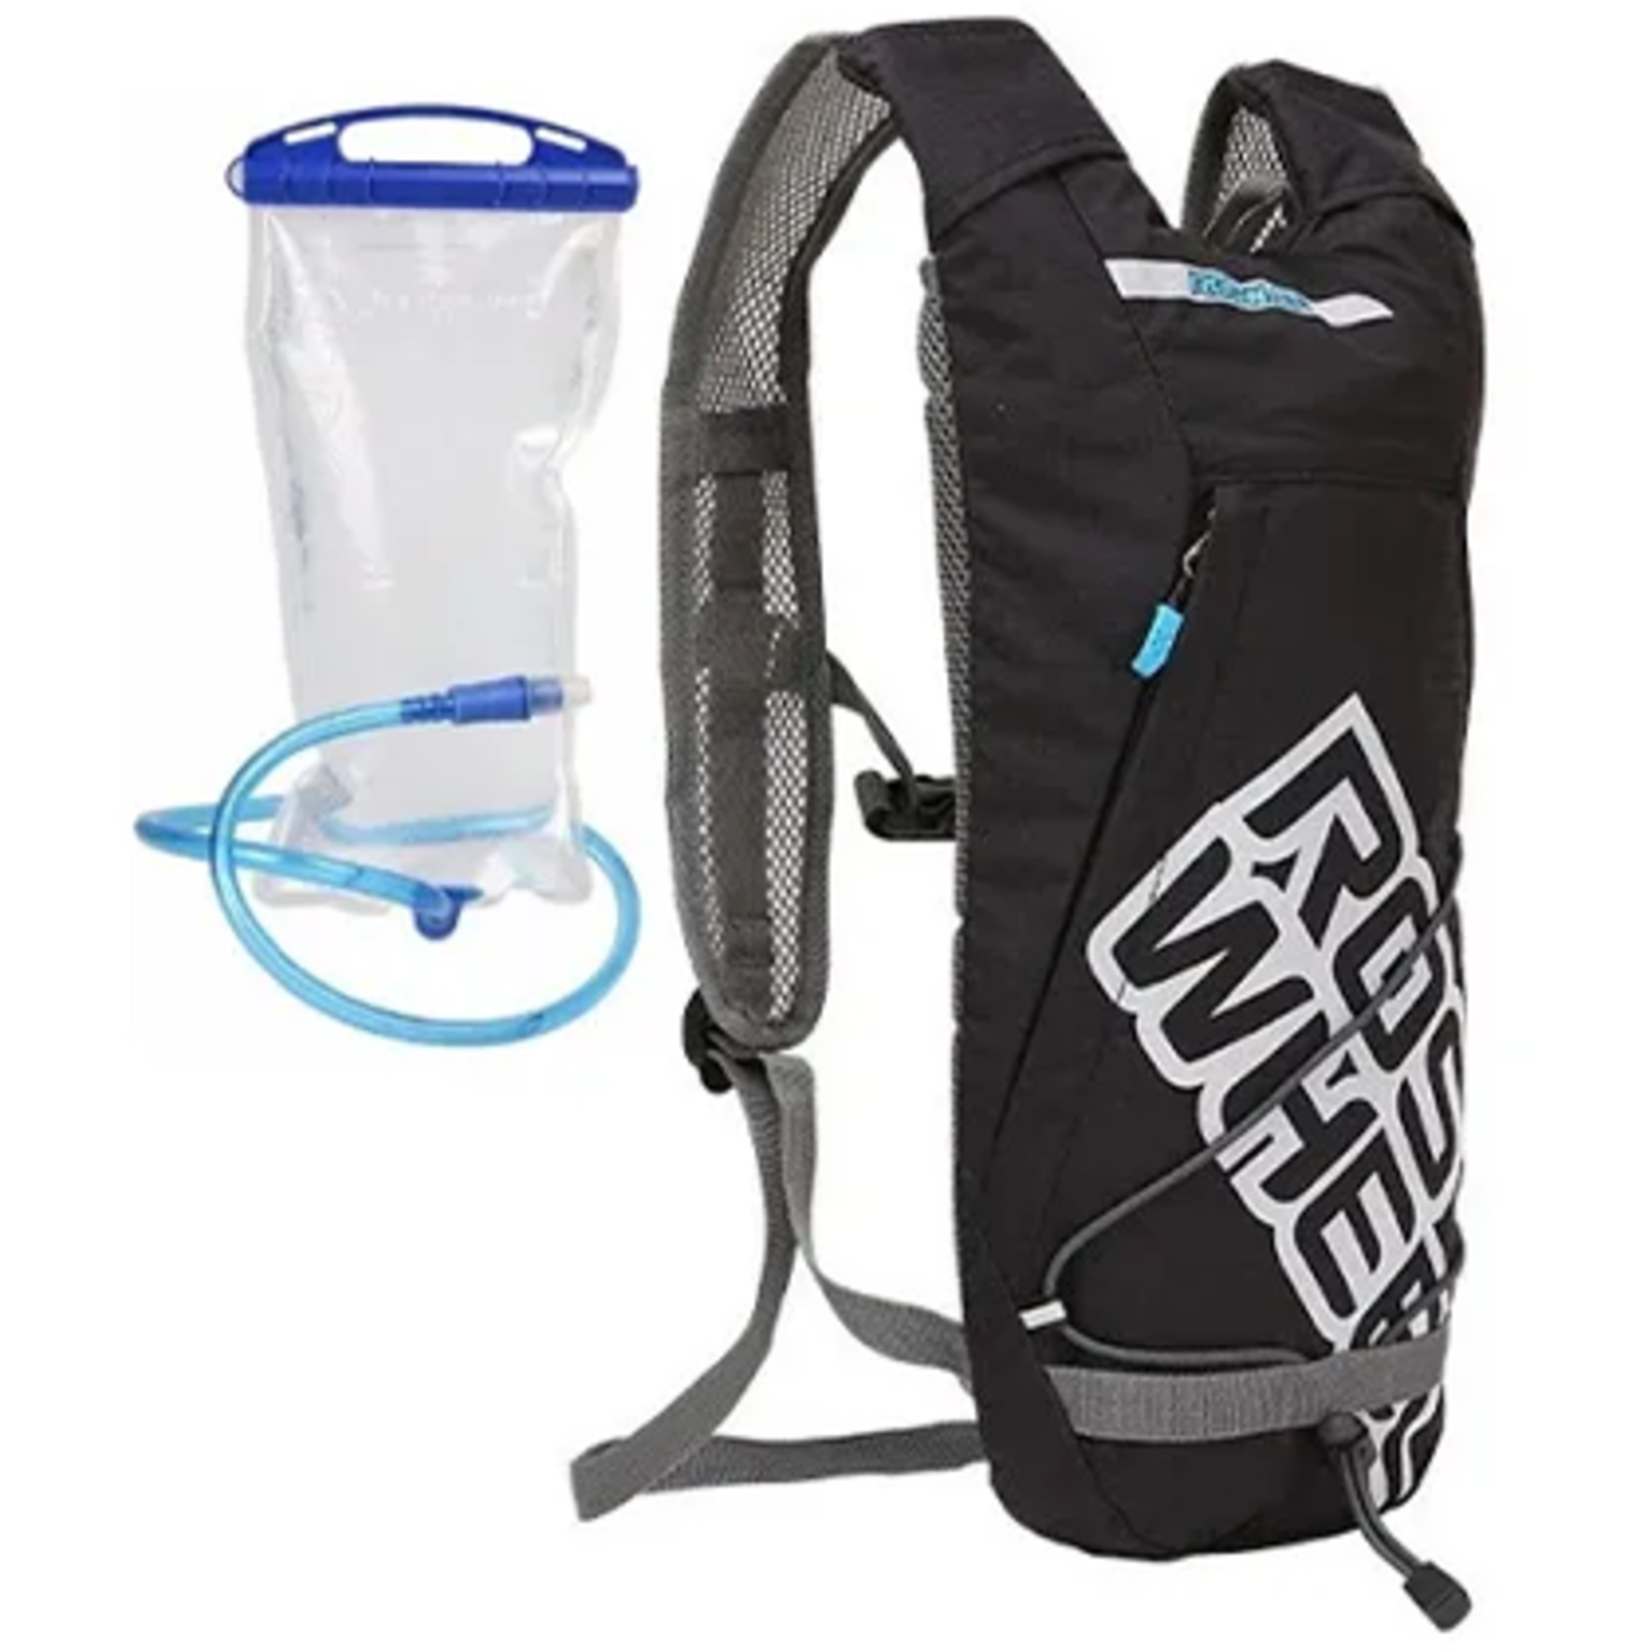 ROSWHEEL Hydration backpack, ultra liteweight black, with 2L Non-Toxic PEVA bladder